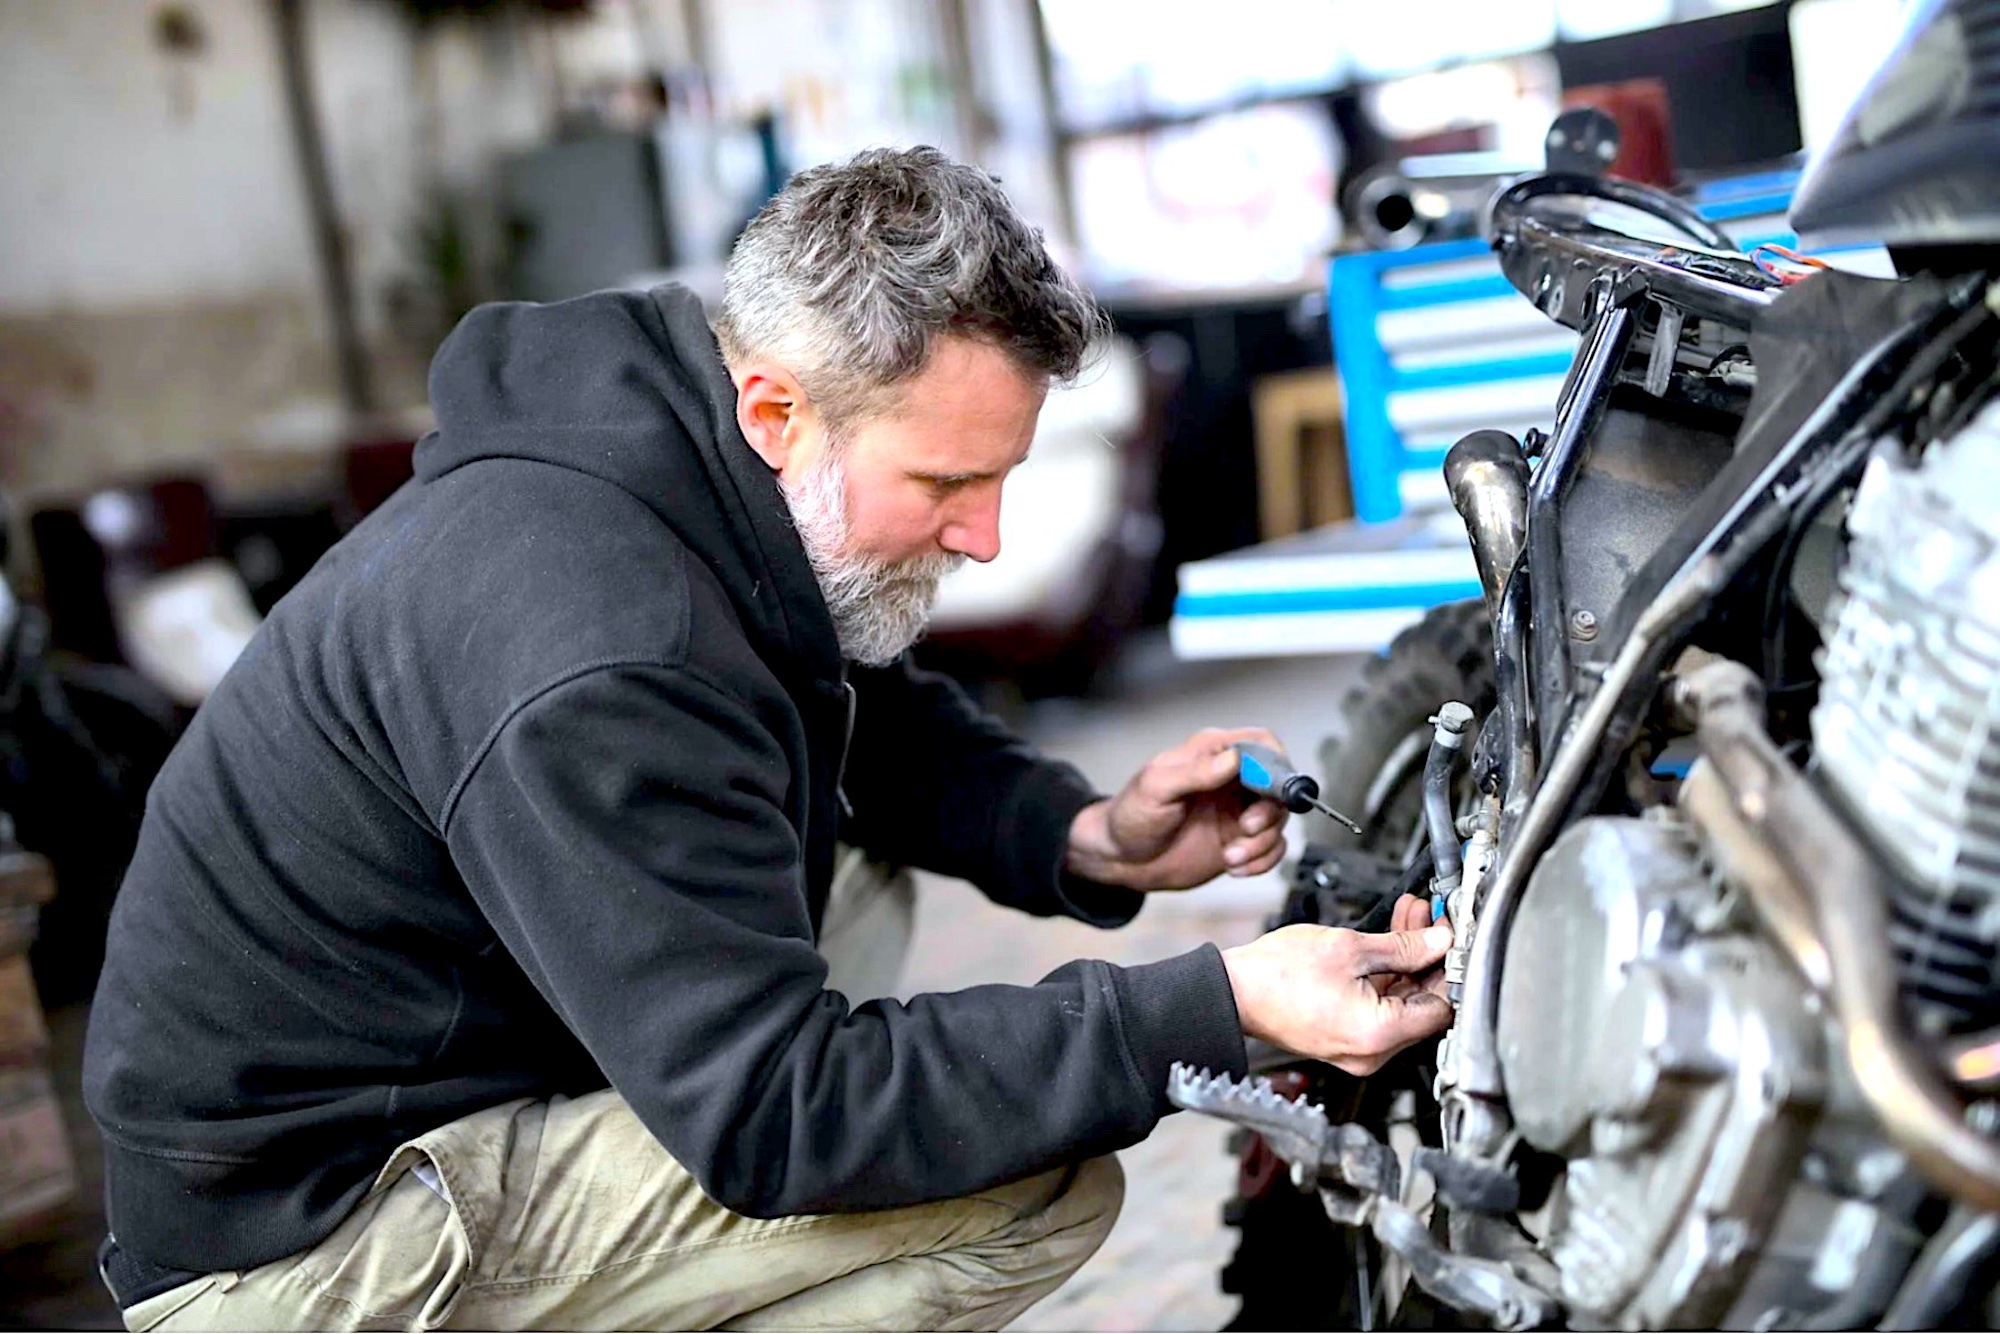 A dude working on a bike. Media sourced from Service Honda.